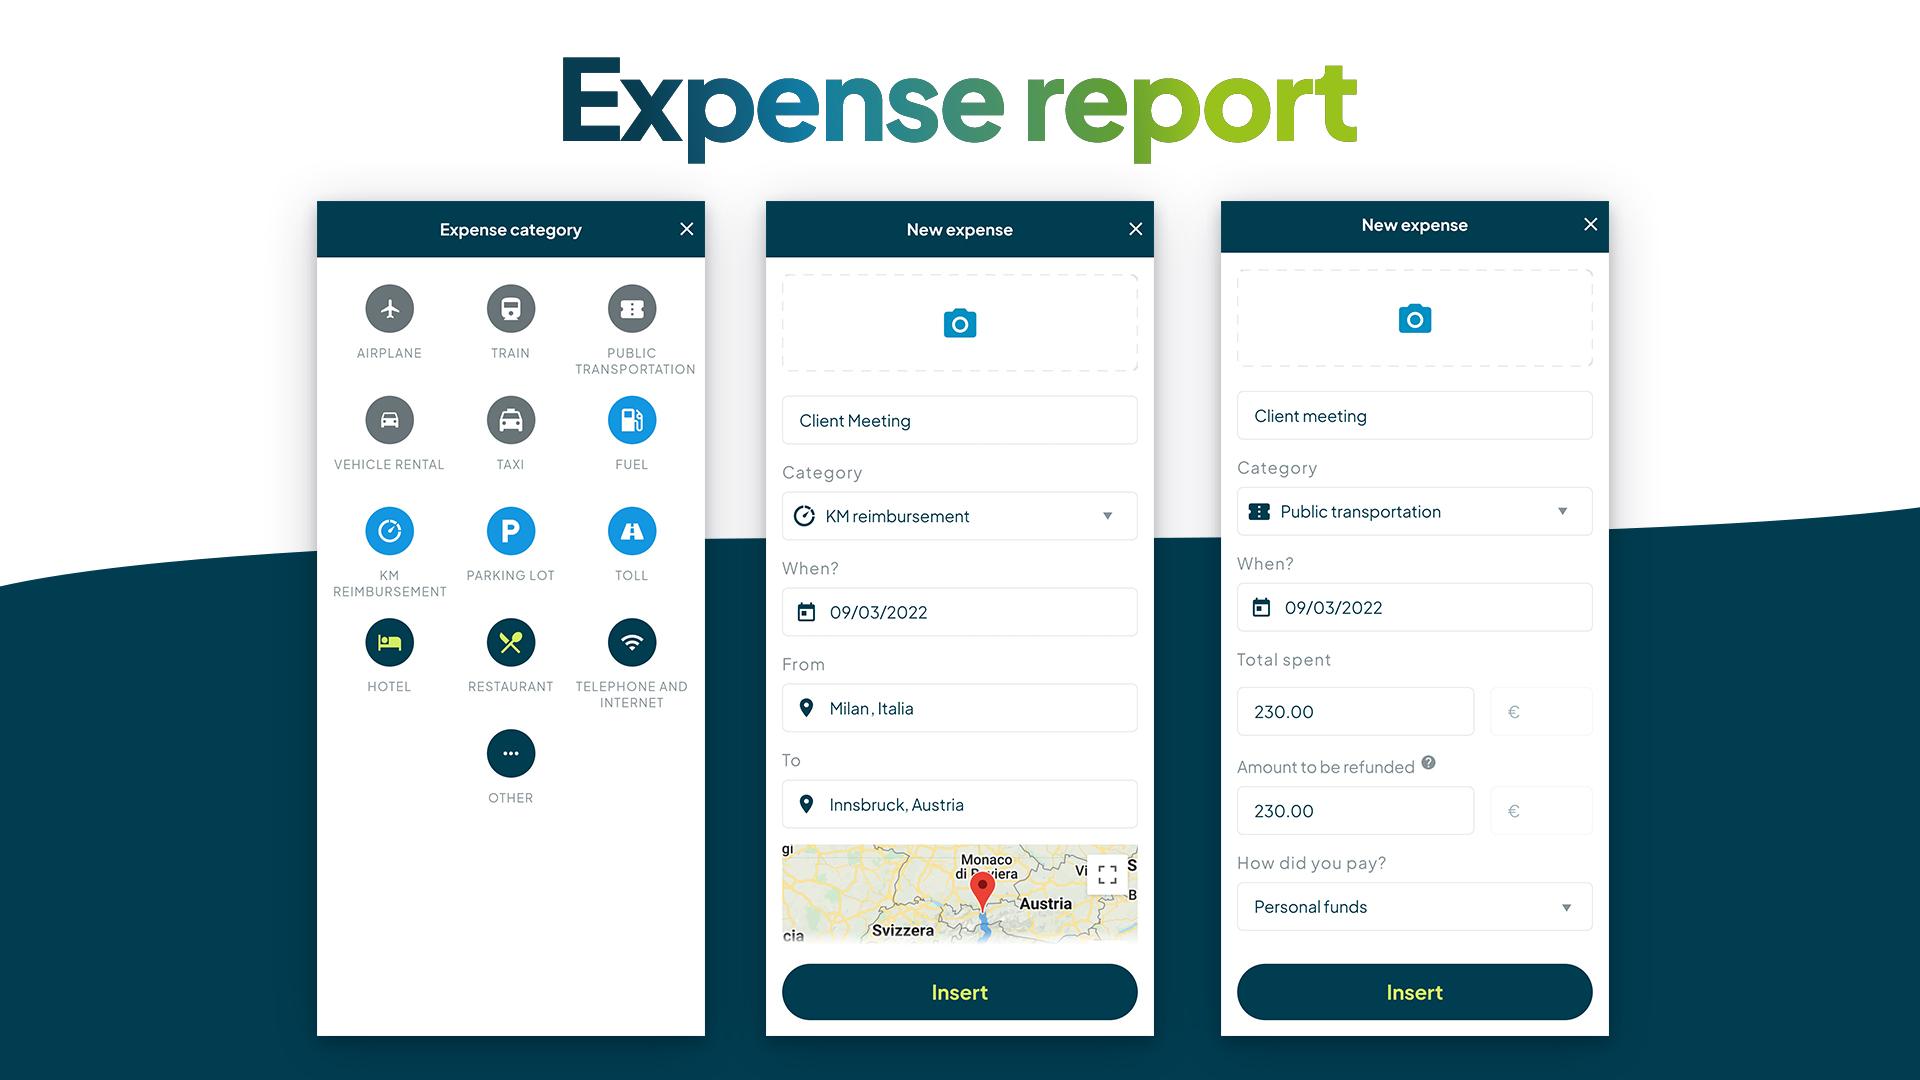 Submit and approve expenses in just a few taps